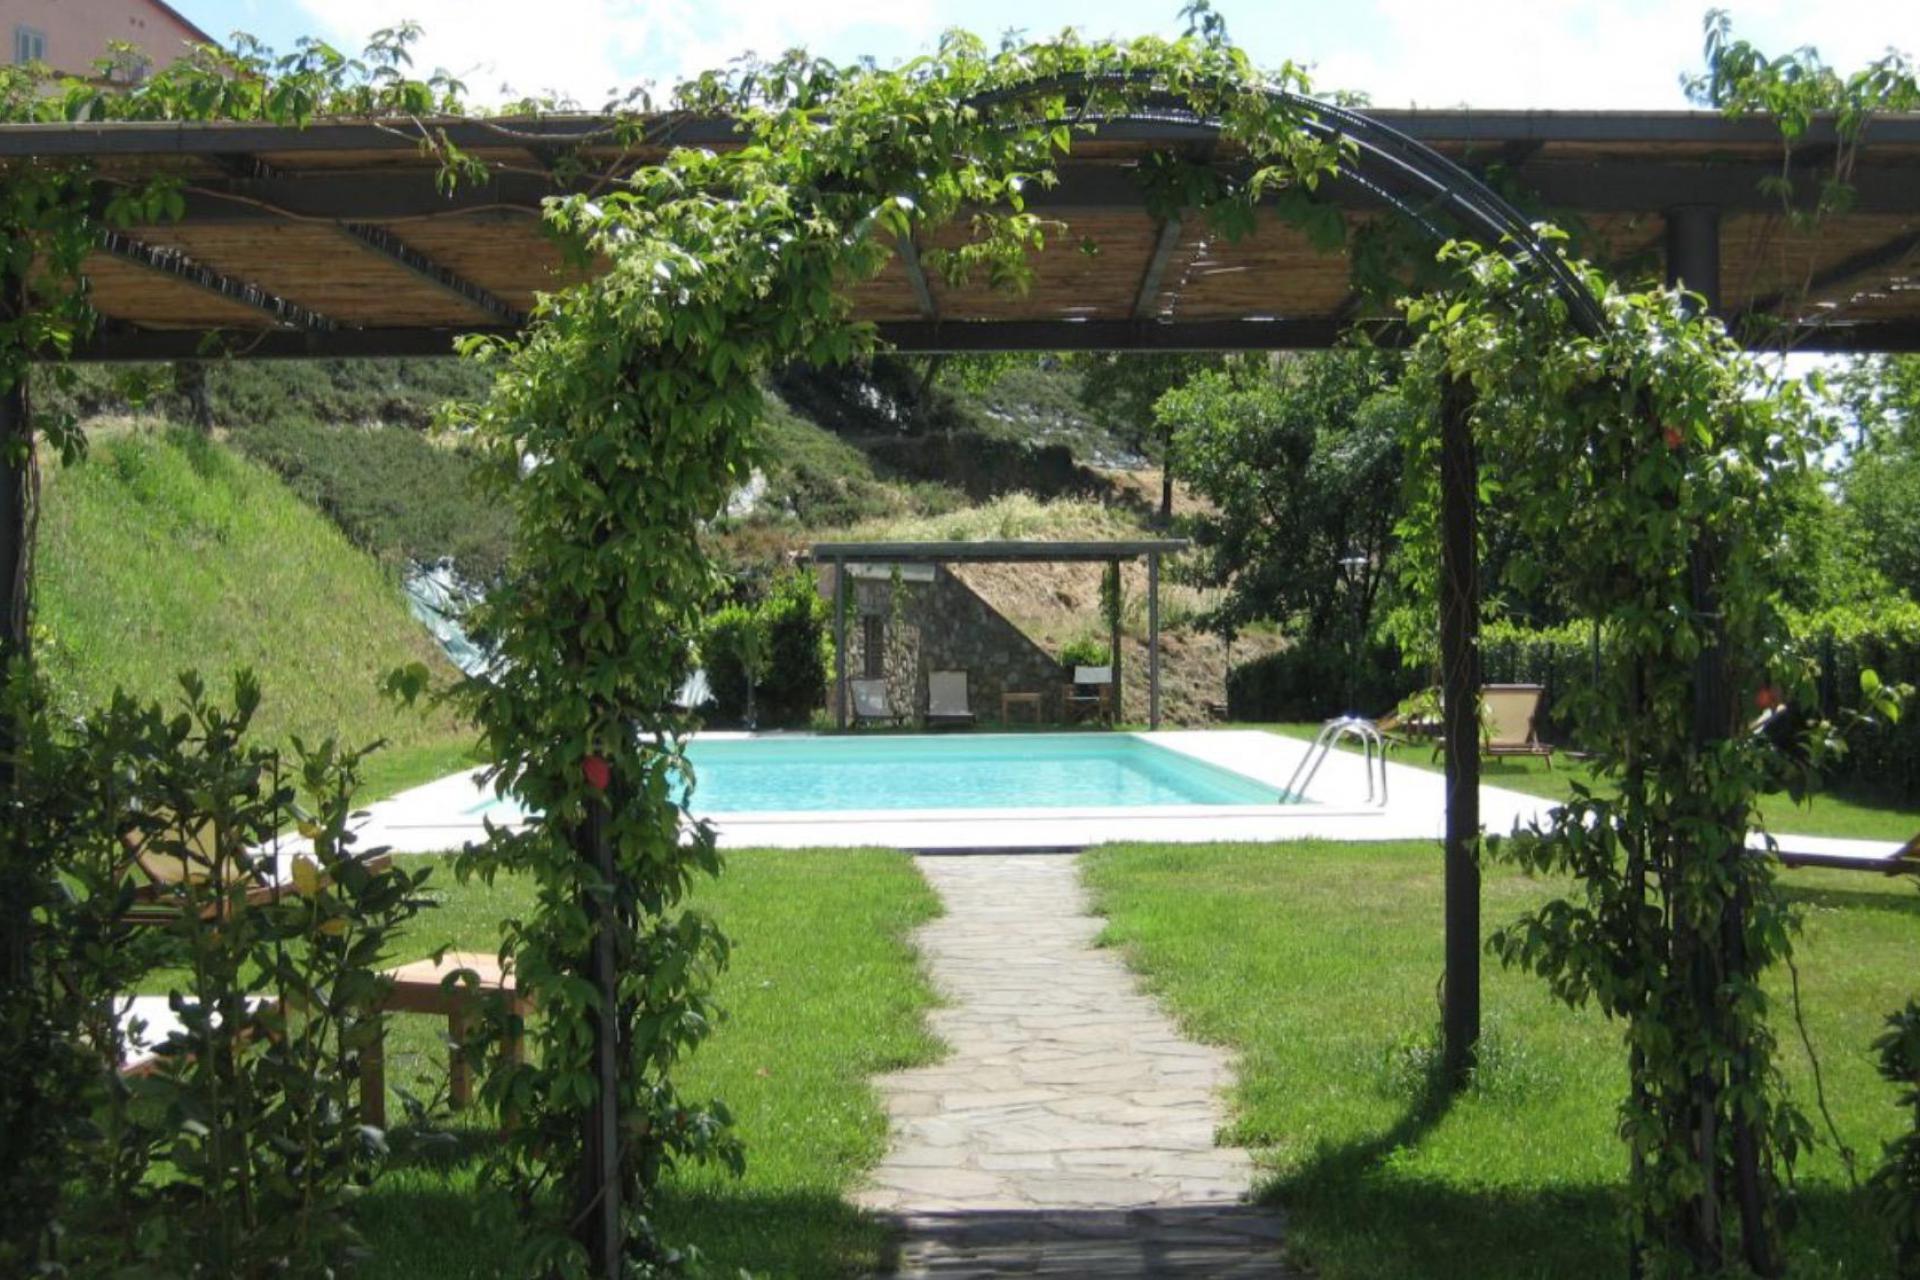 Perfect agriturismo for a summer holiday with the family